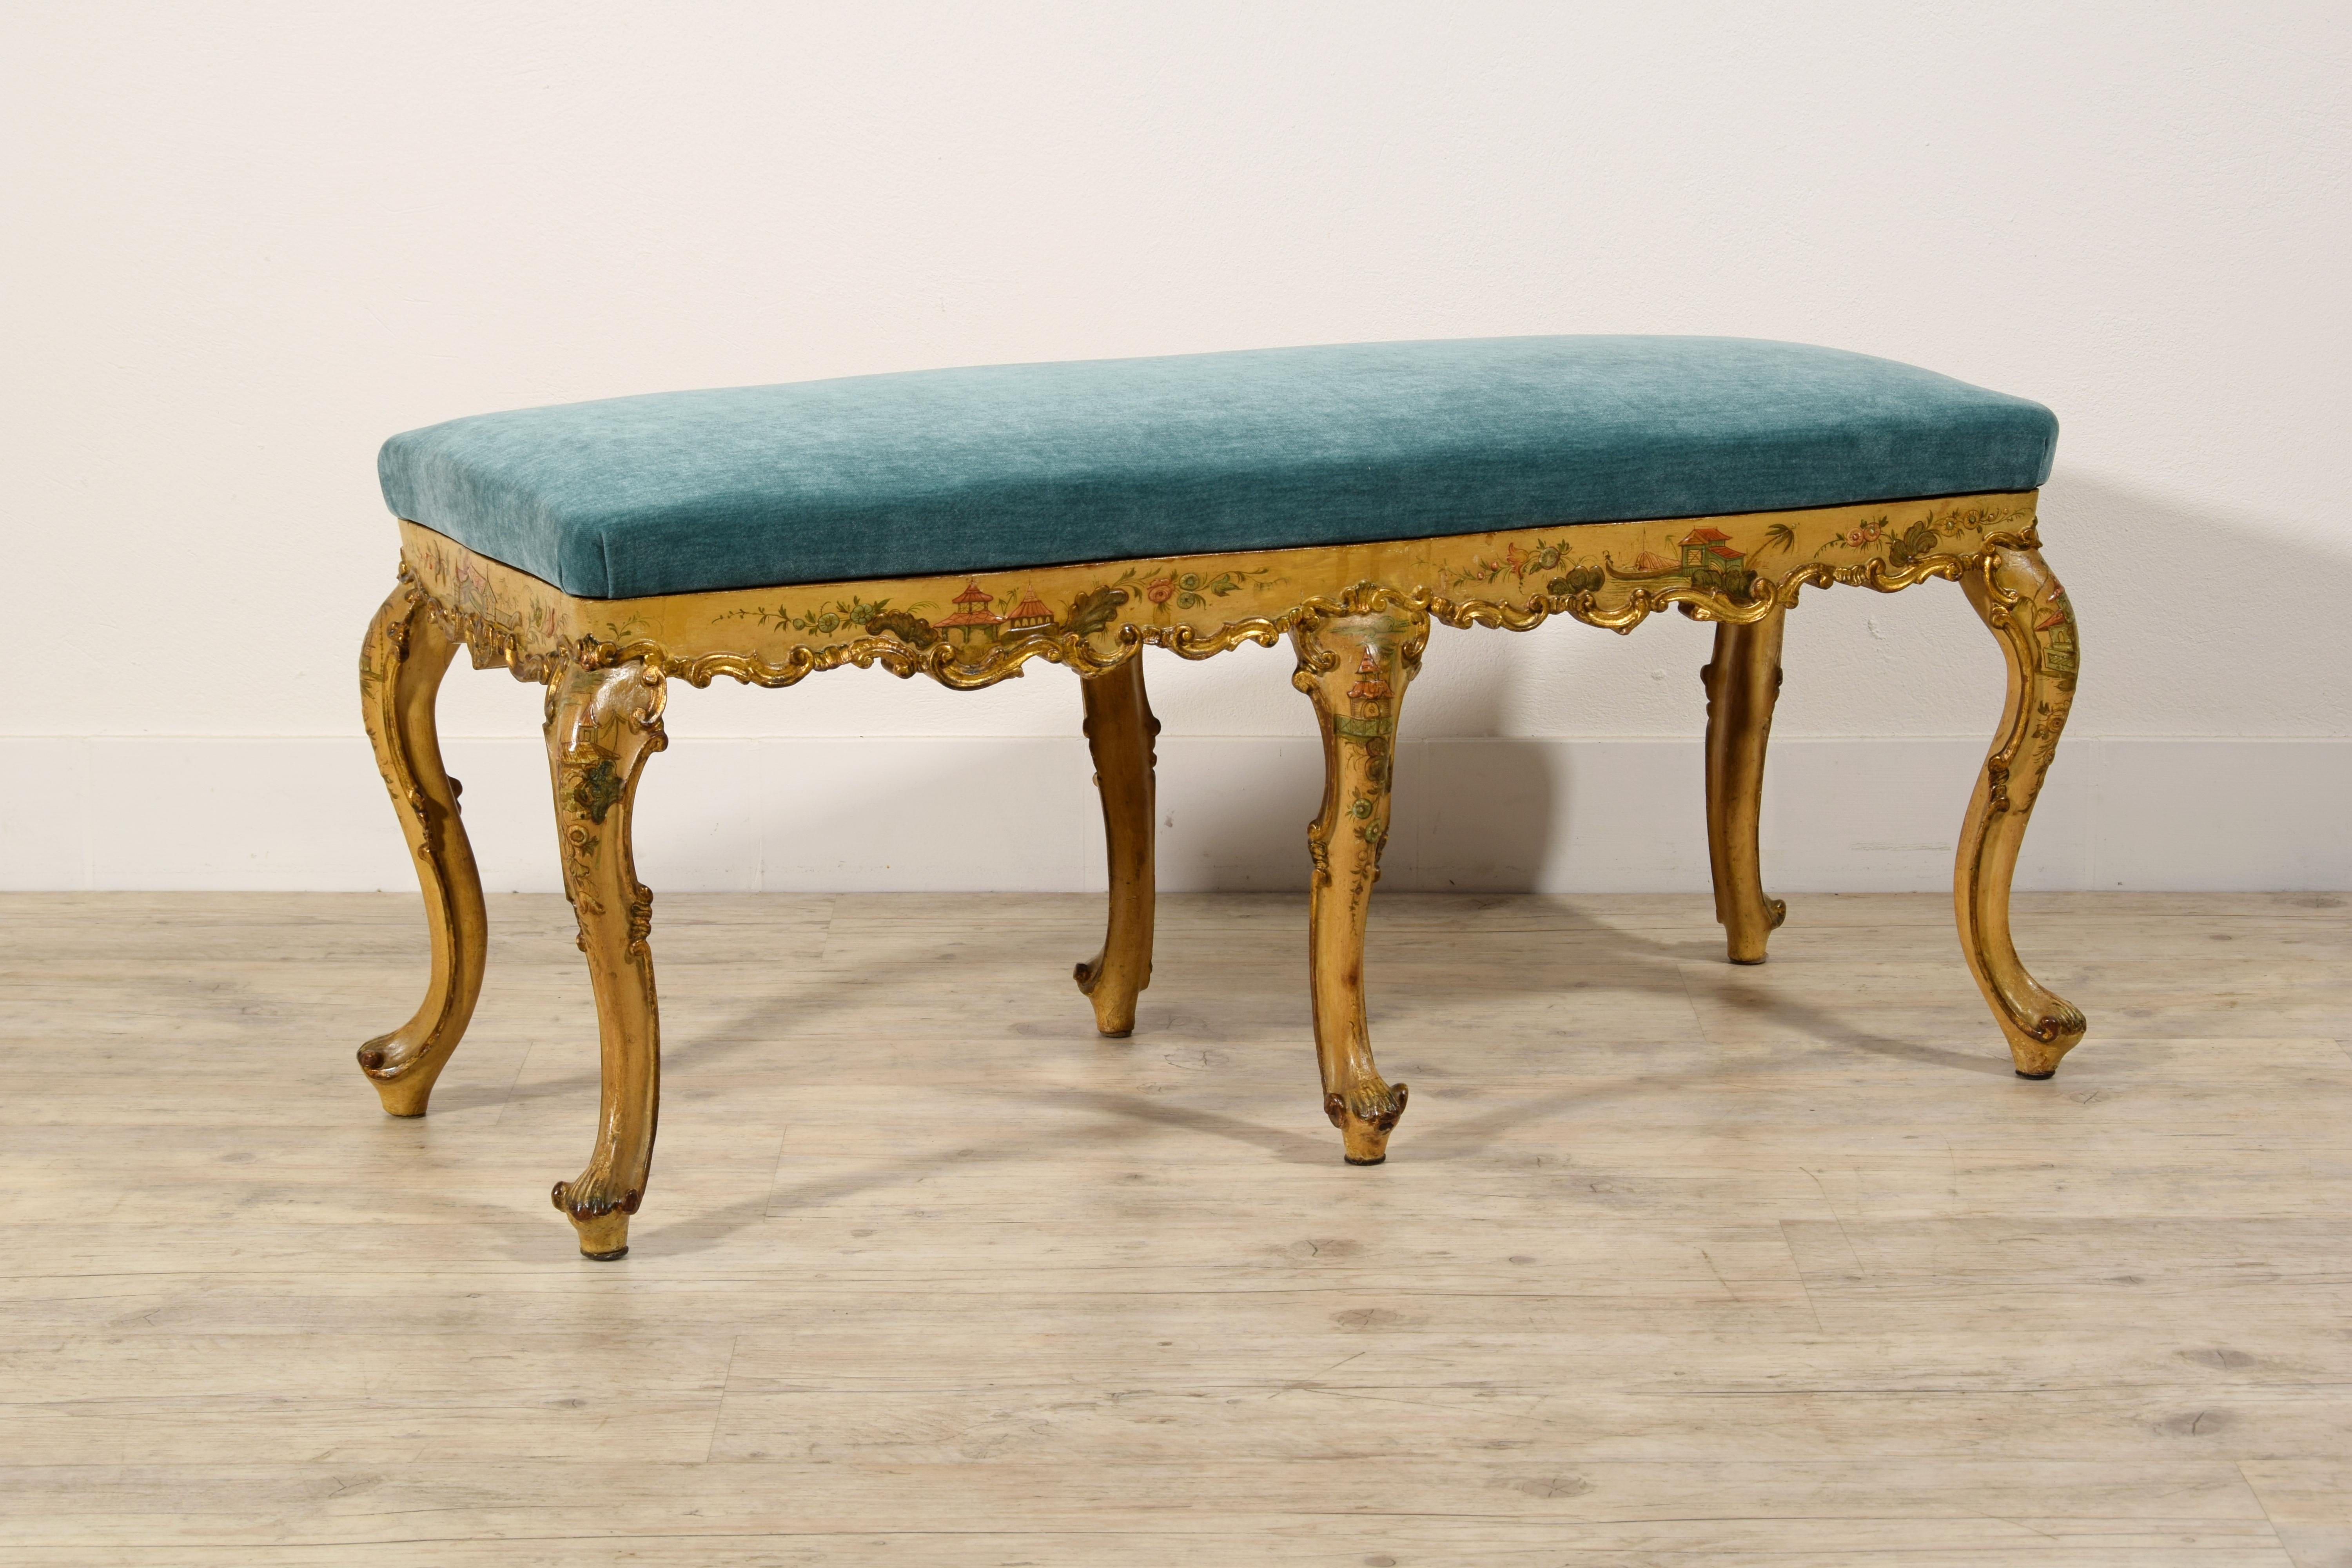 20th Century, Venetian Baroque Stile Carved and Laquered Giltwood Bench For Sale 1